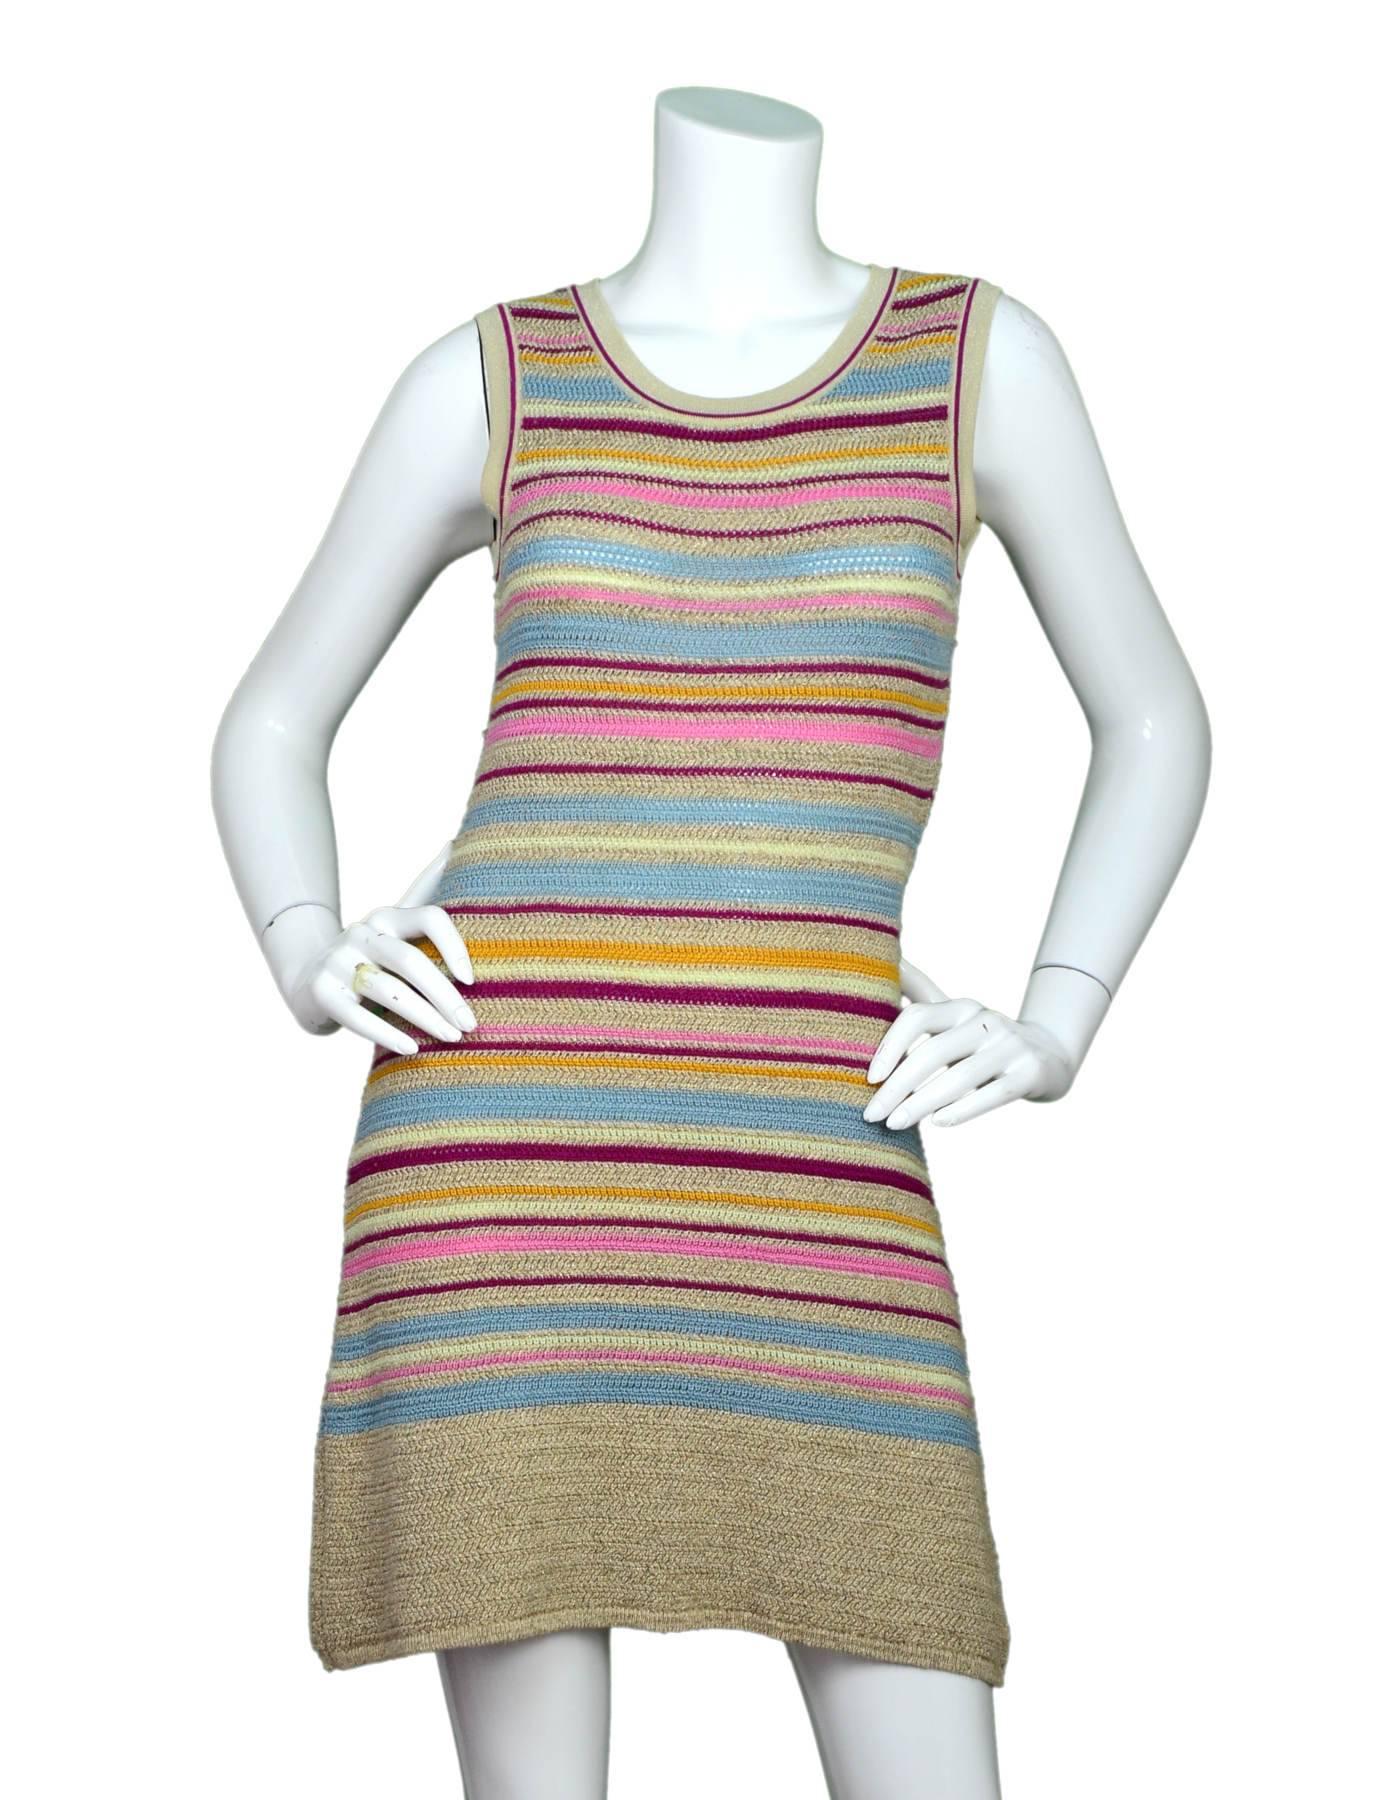 Chanel Tan & Multi-Colored Striped Knit Dress Sz FR36

Features metallic threading throughout

Made In: France
Year Of Production: 2011 cruise
Color: Tan, pink, blue
Composition: 95% cotton, 5% rayon
Lining: None
Closure/Opening: Pull over with